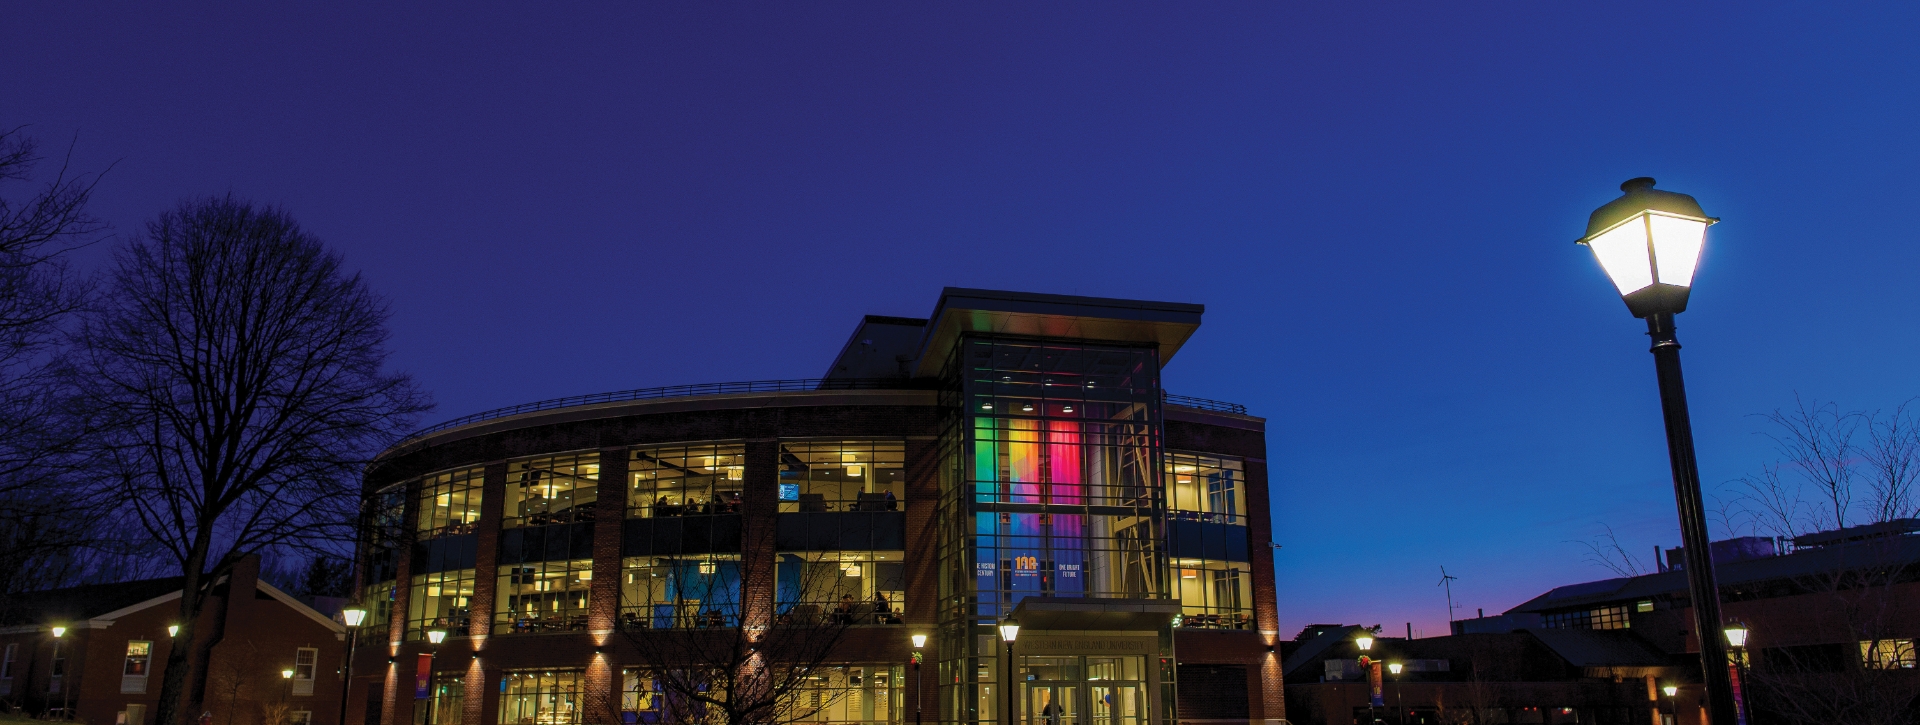 Nighttime view of the University Commons with centennial banners